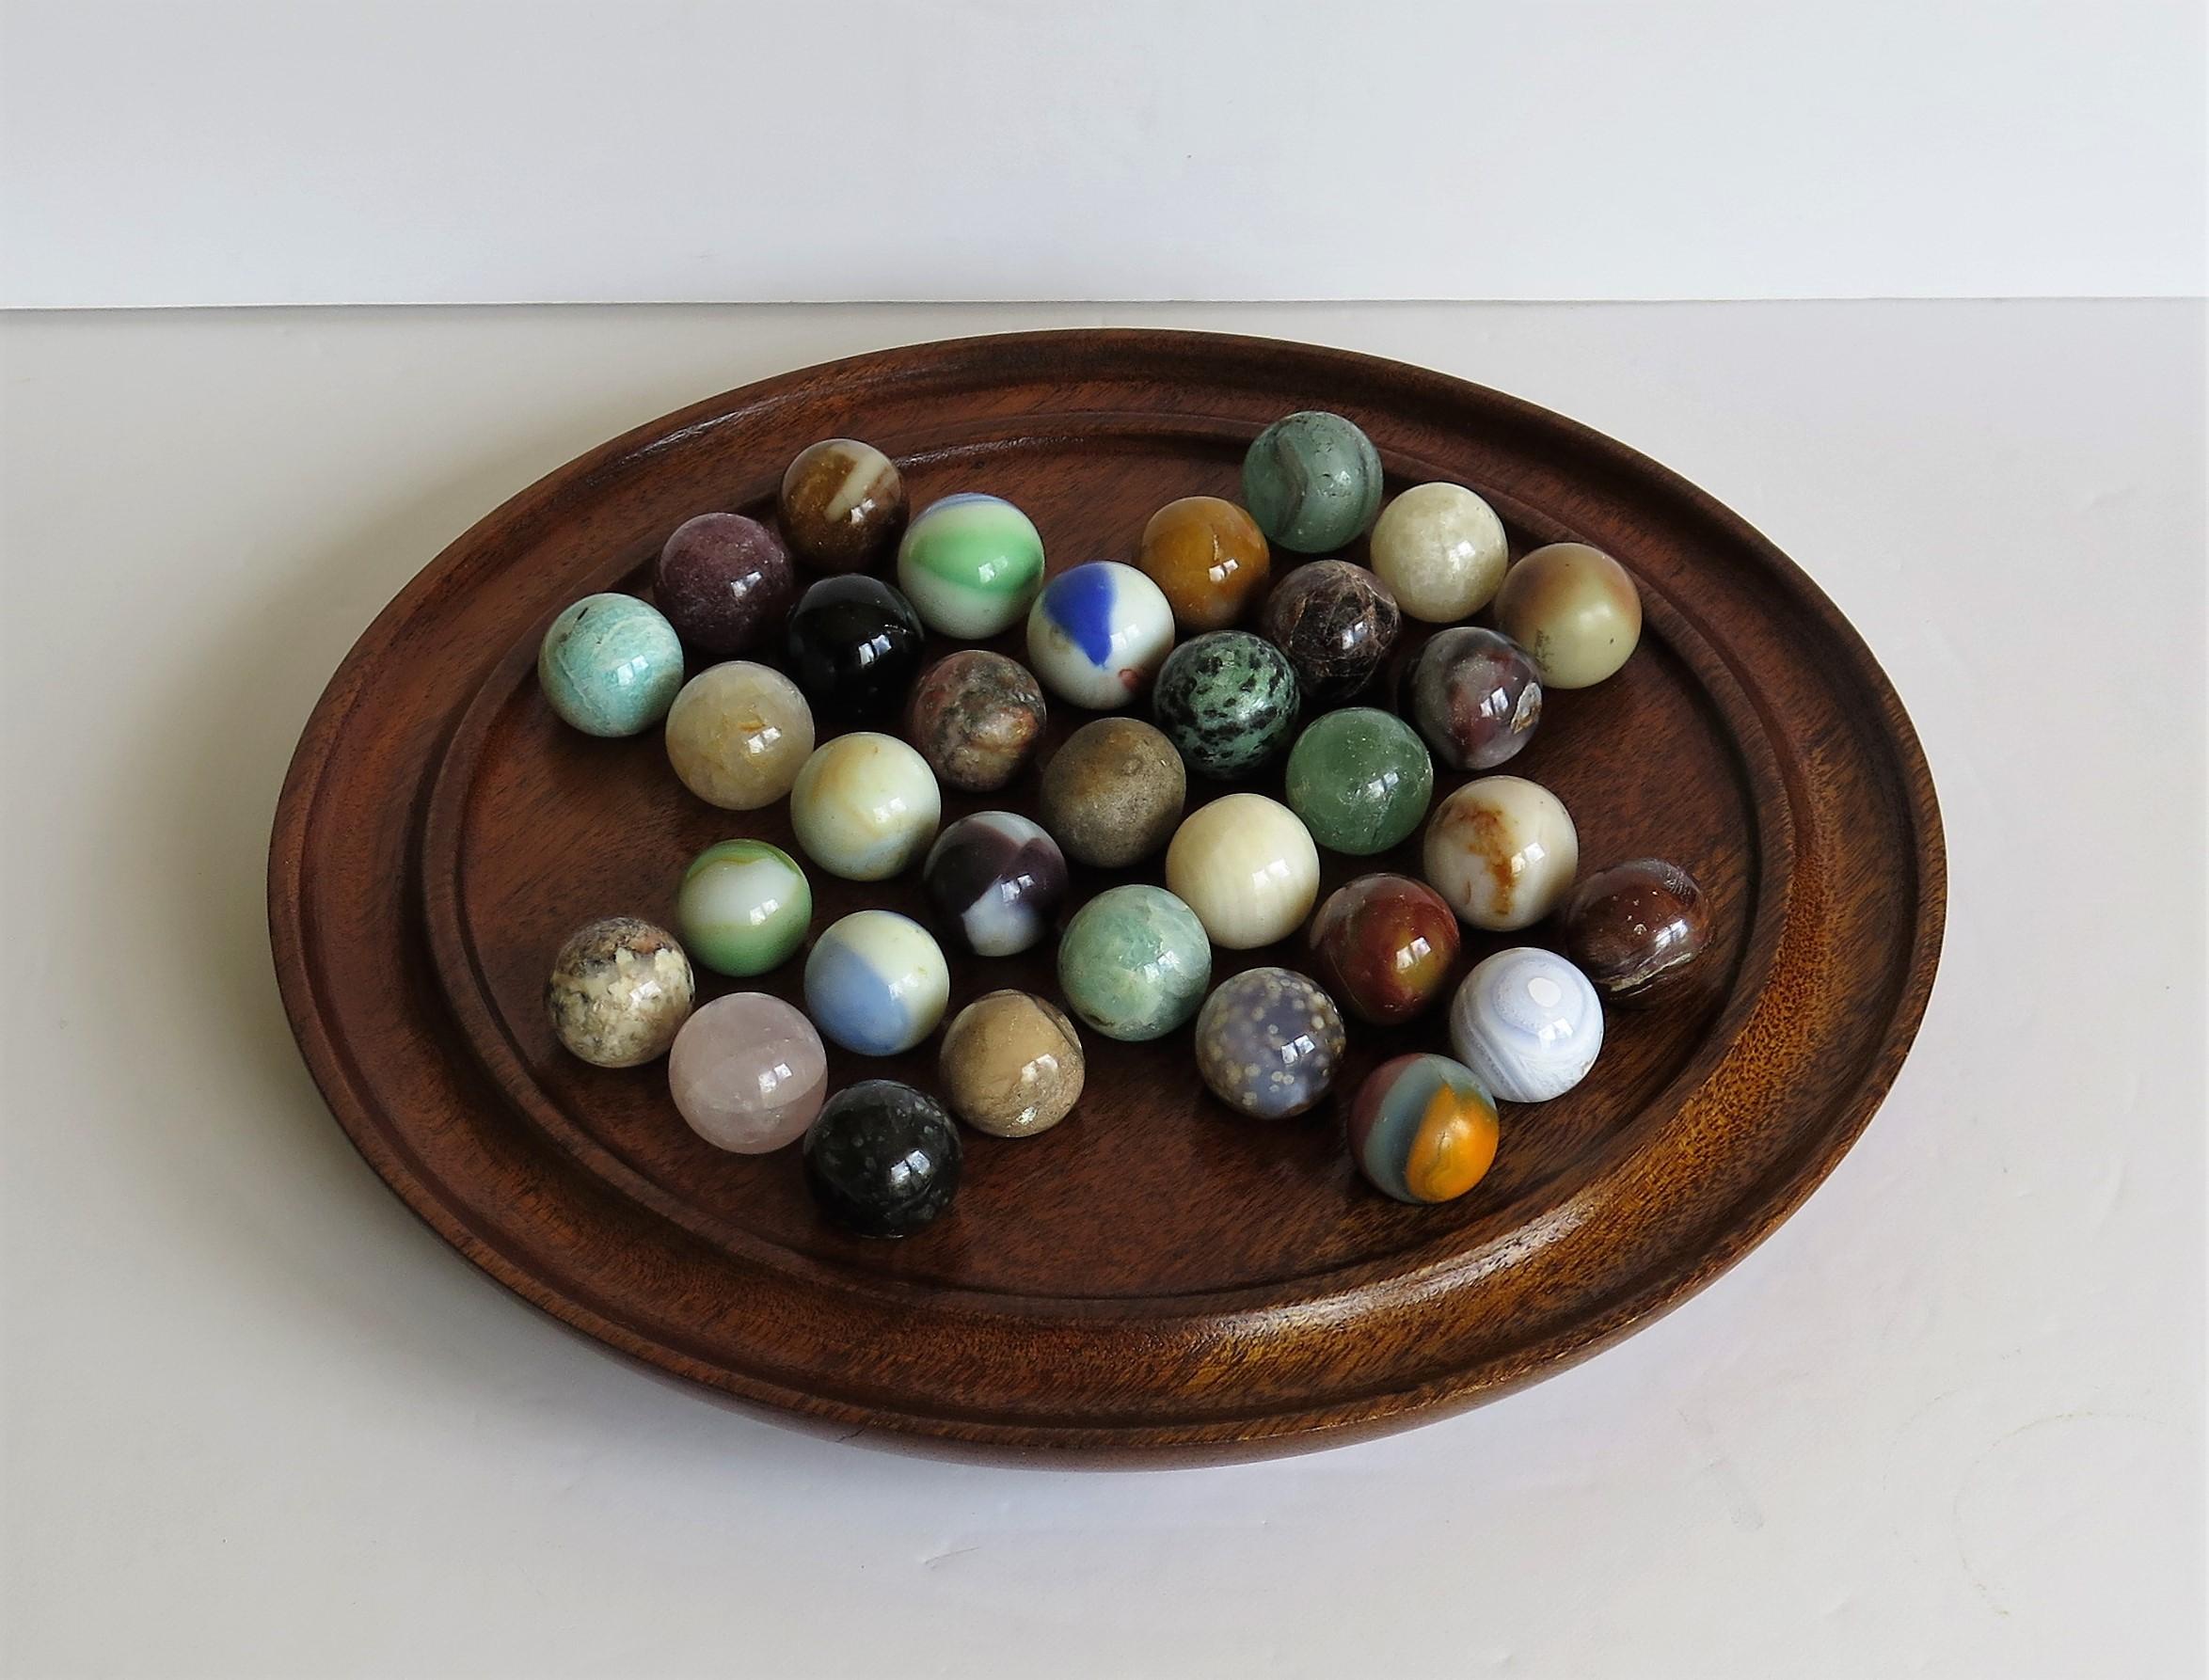 This is a very decorative and complete board game of 33 hole marble solitaire with a mid size hardwood board and 33 individual mainly mineral or agate stone and some glass marbles, which we date to the early 20th century, probably of French